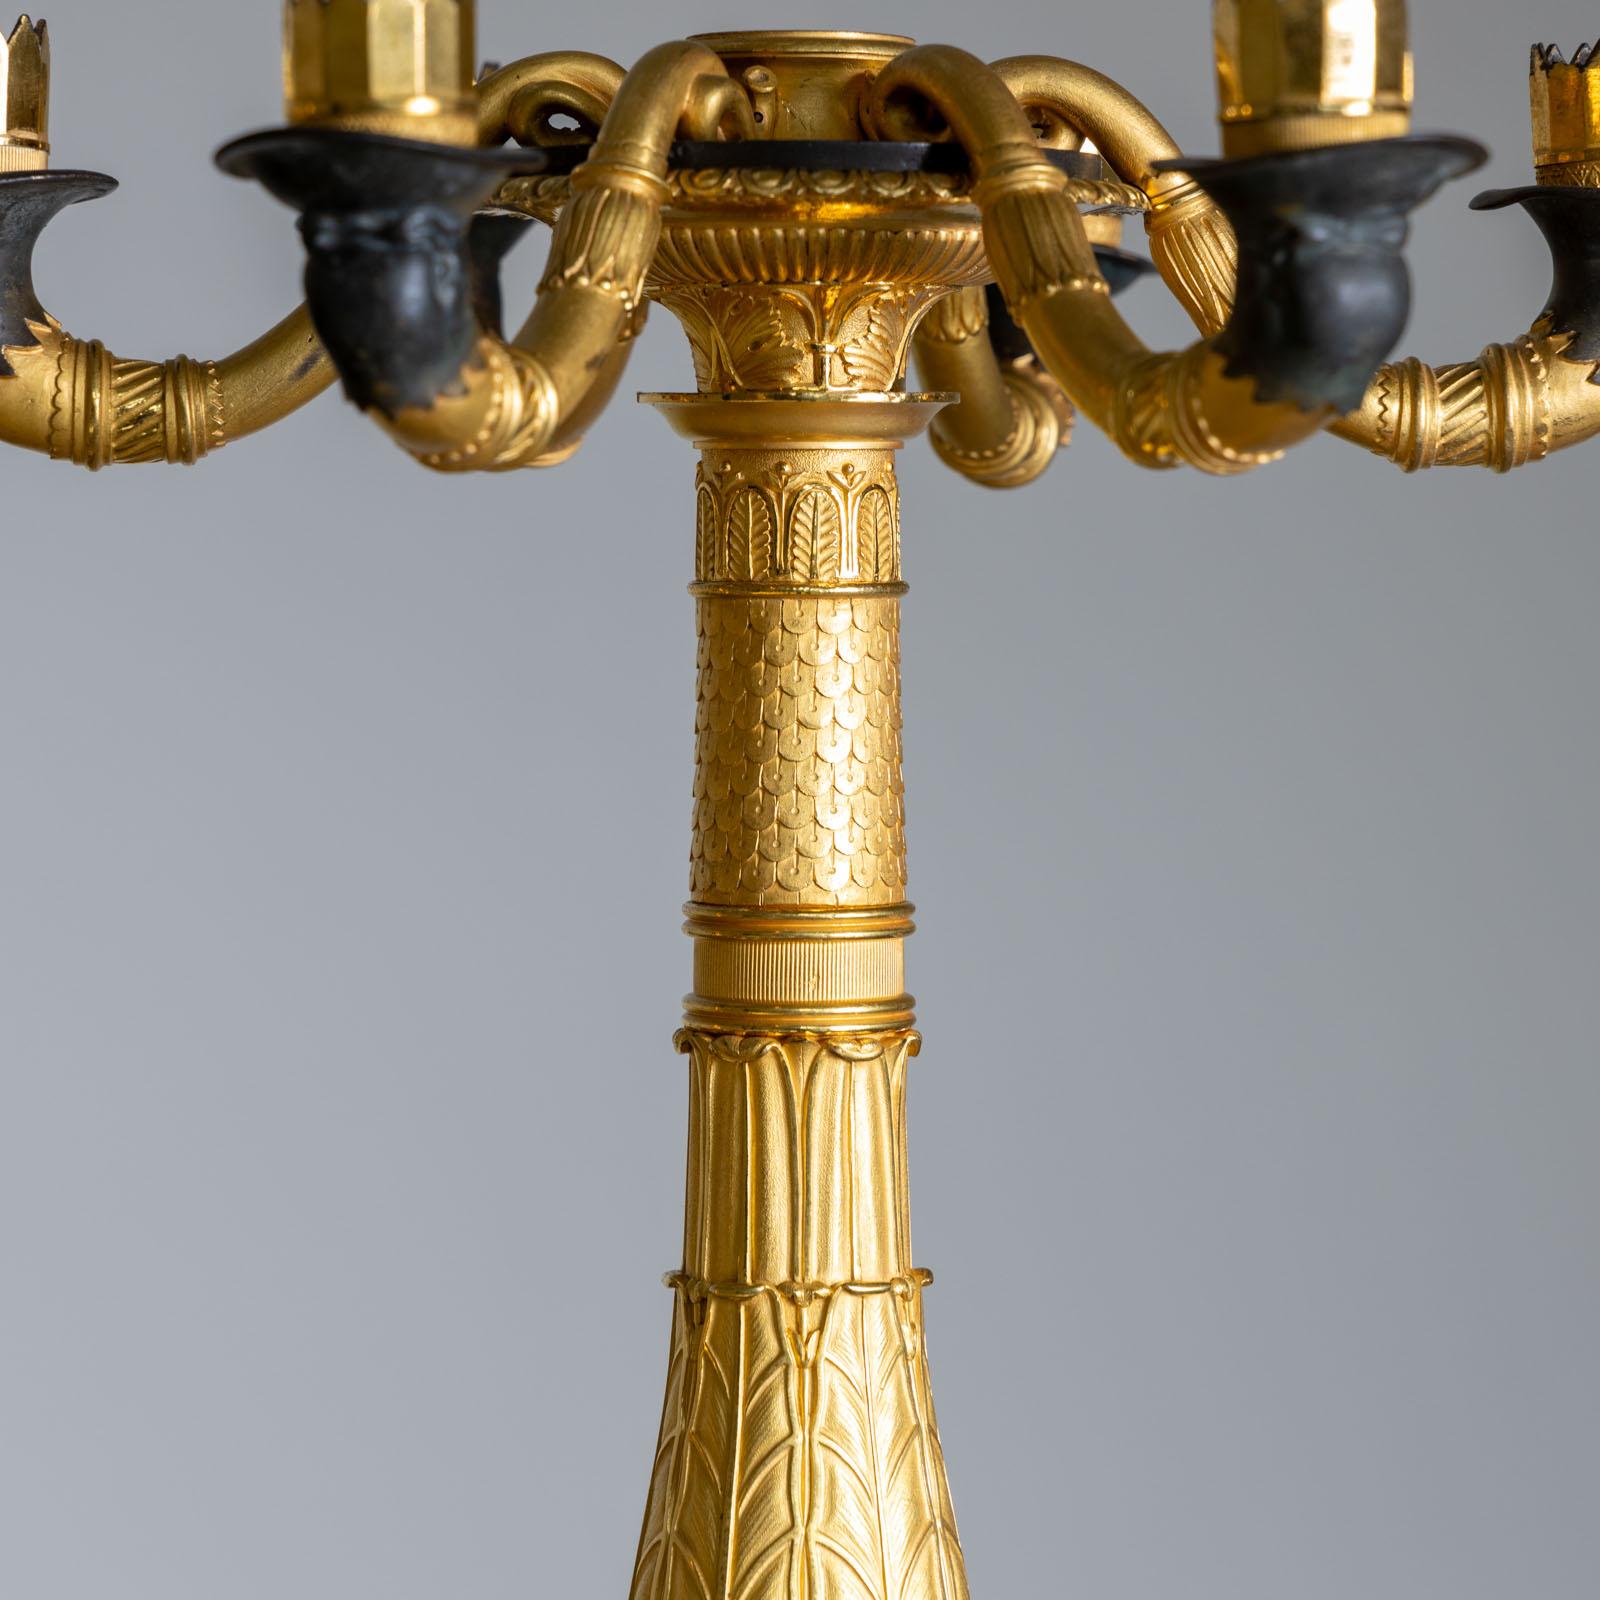 Pair of Charles X candlesticks with six arms on marble pedestals. The candlesticks are made of partly gilded bronze and decorated with nymphs, lion paws and lion masks, among other things. The final crowning is missing, but at a height of 75 cm they